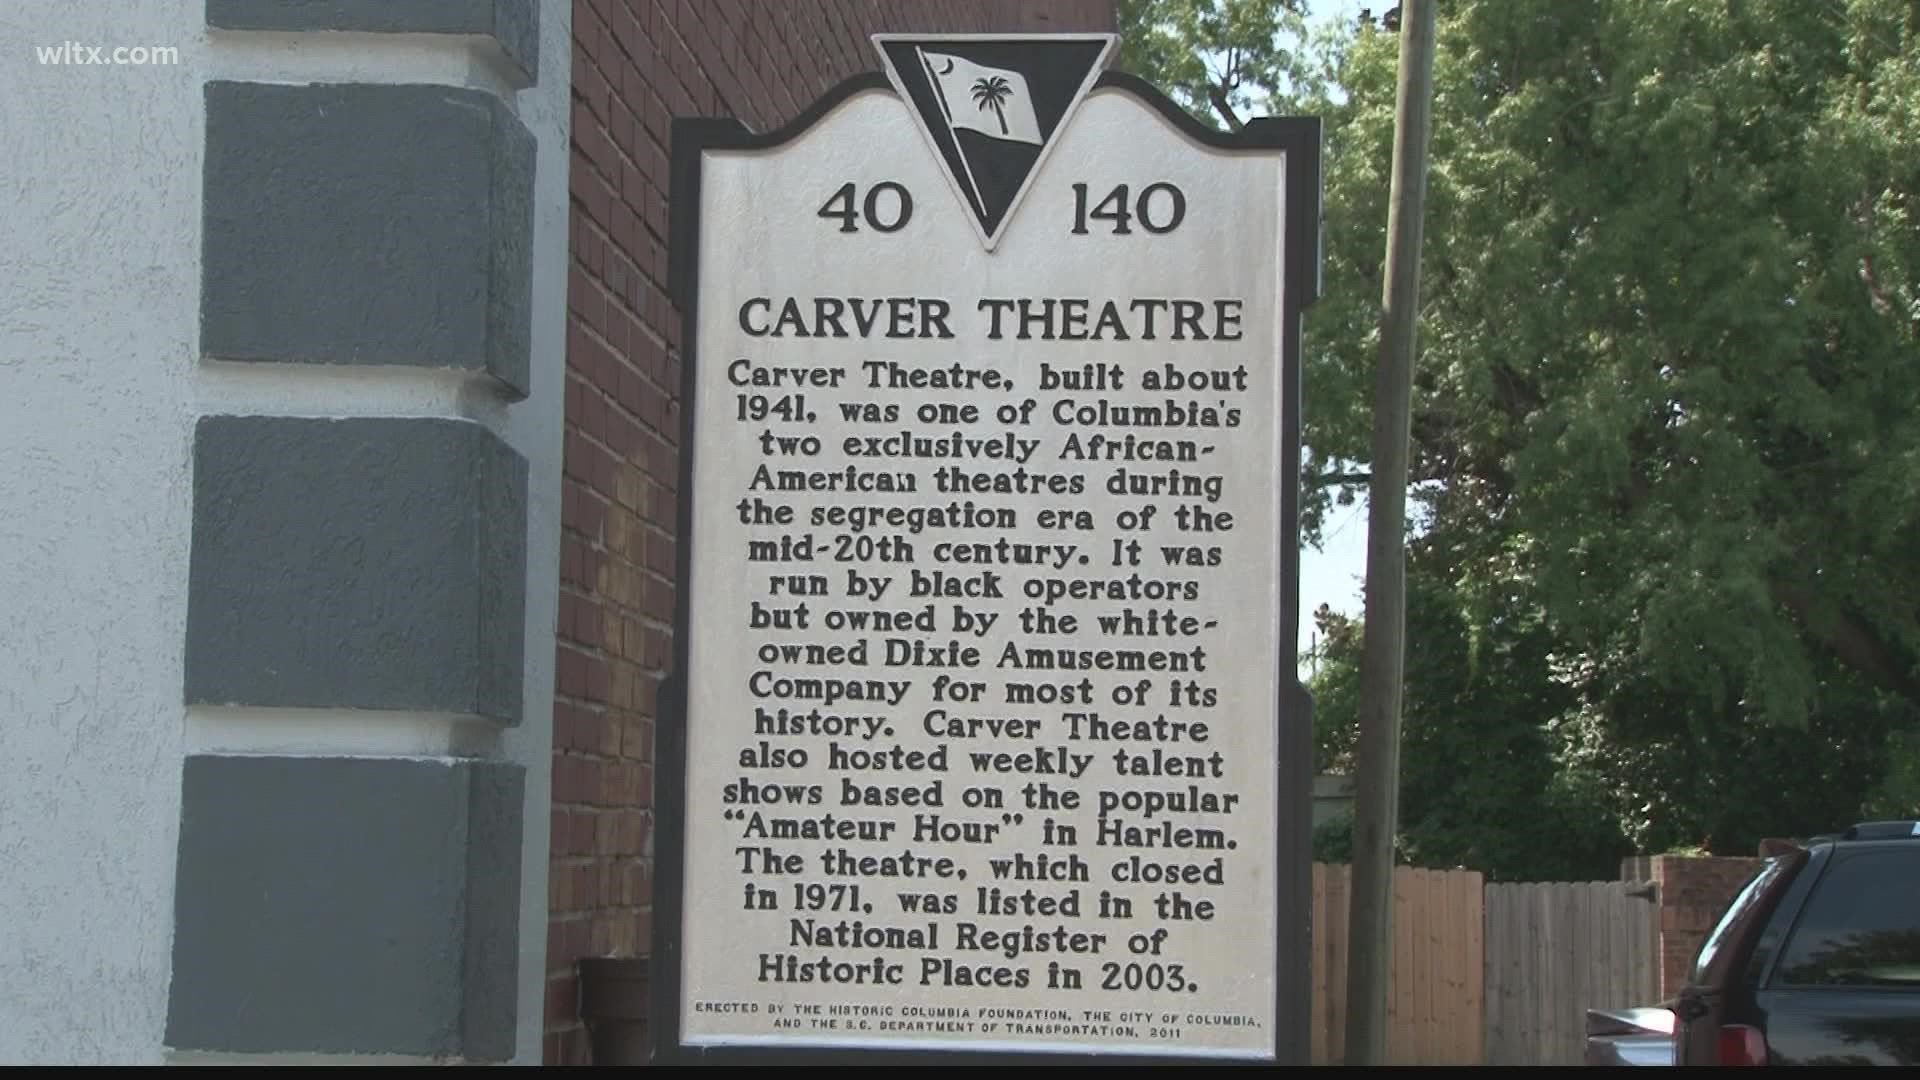 Allen University plans to renovate and reopen Carver Theatre on Harden Street. The building hasn't functioned as a movie theatre for over 50 years.